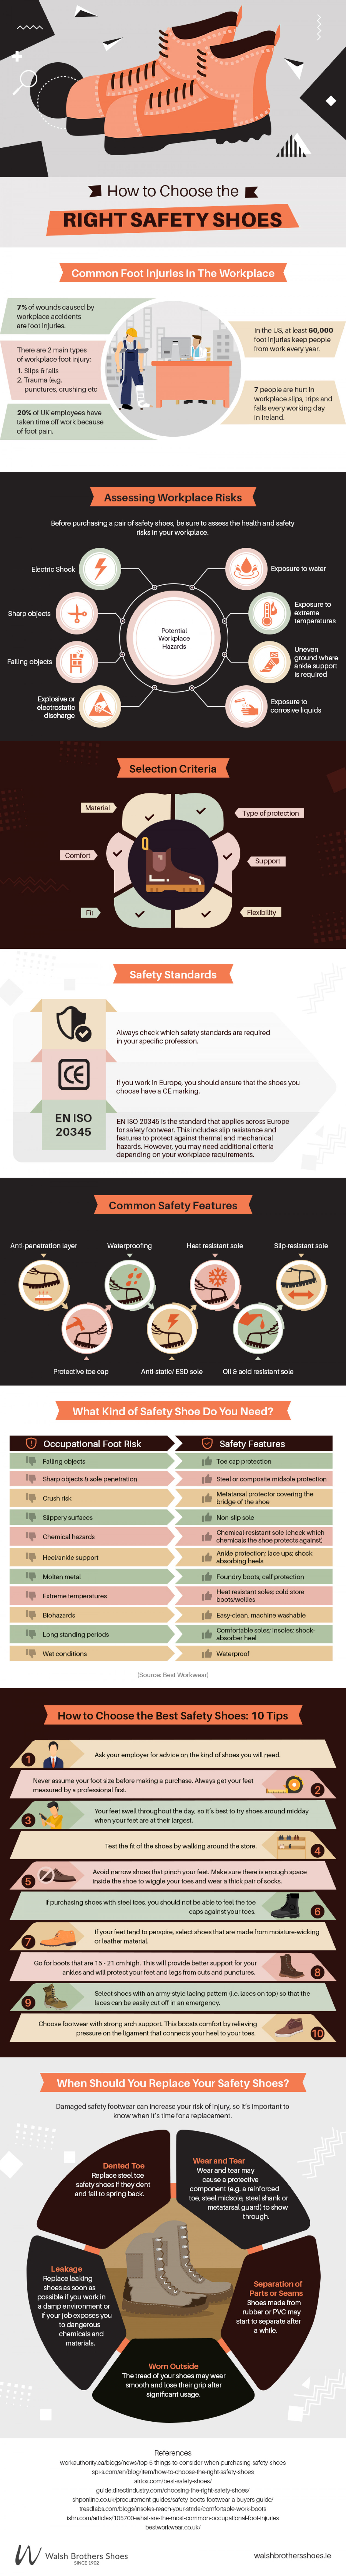 Safety Shoes Infographic